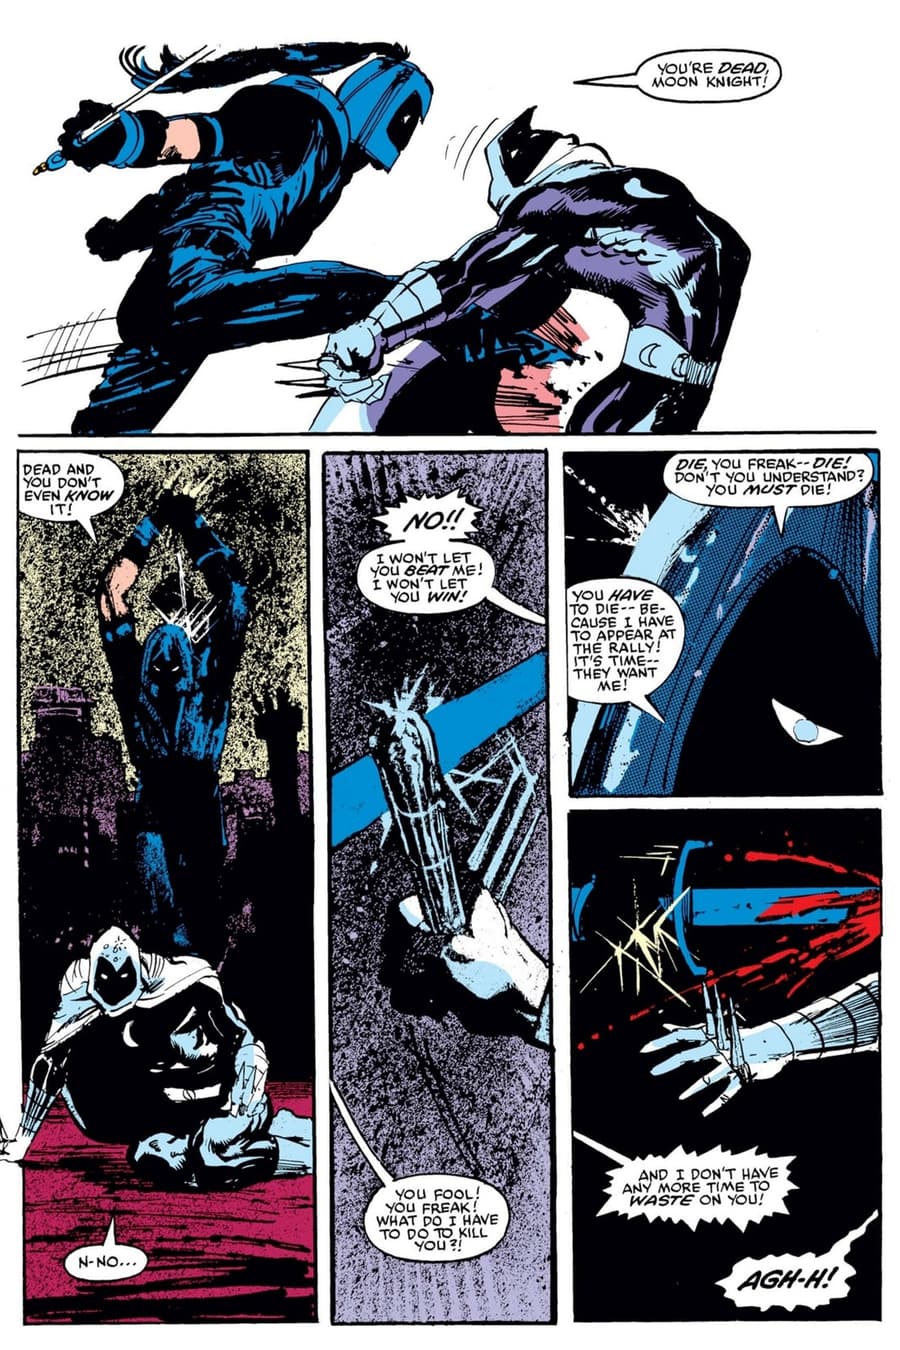 MOON KNIGHT (1980) #25 page by Doug Moench and Bill Sienkiewicz